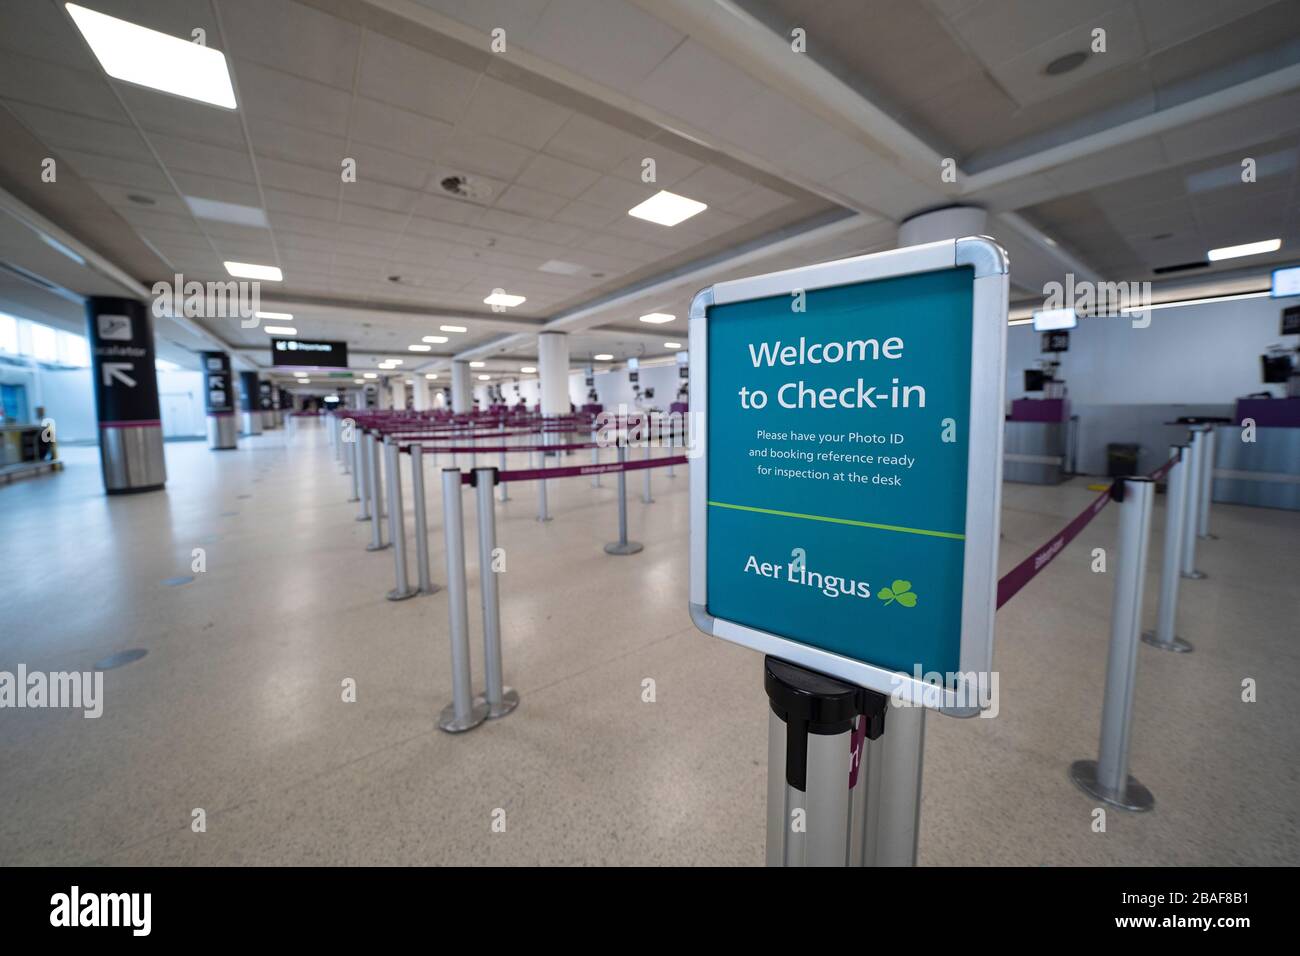 Edinburgh, Scotland, UK. 27 March, 2020. Interior views of a deserted Edinburgh Airport during the coronavirus pandemic. With very few flights during the current Covid-19 crisis passengers are scarce in the terminal building. Empty check in at Aer Lingus counter. Iain Masterton/Alamy Live News Stock Photo